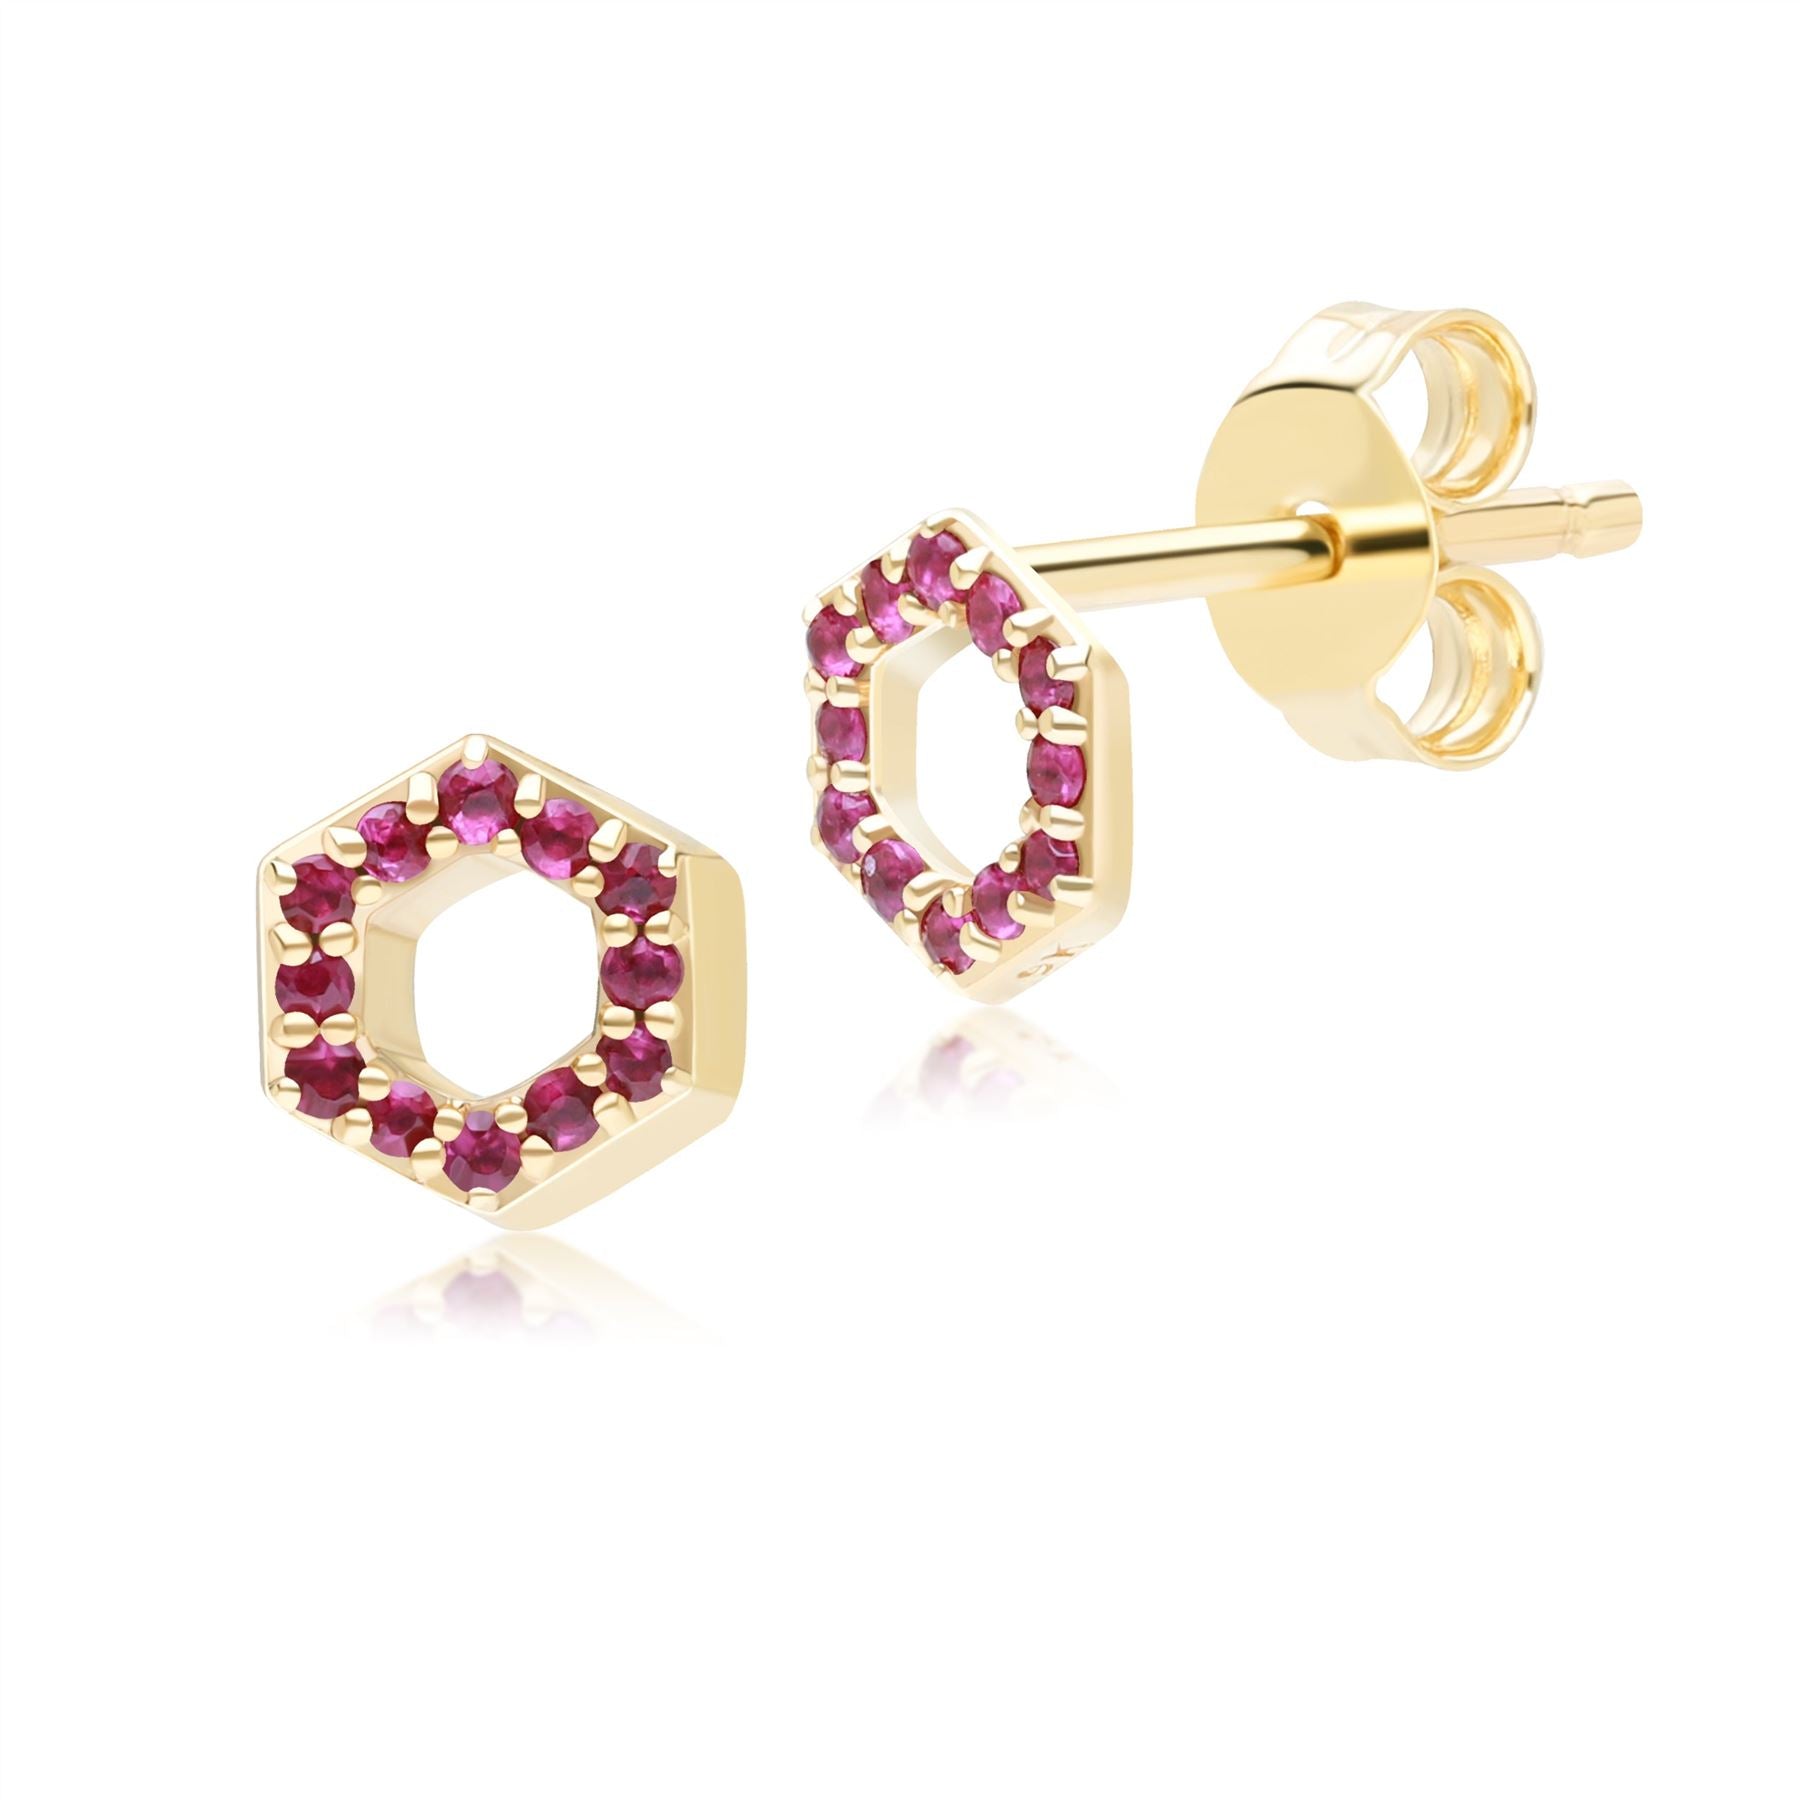 Geometric Hex Ruby Stud Earrings in 9ct Yellow Gold Front